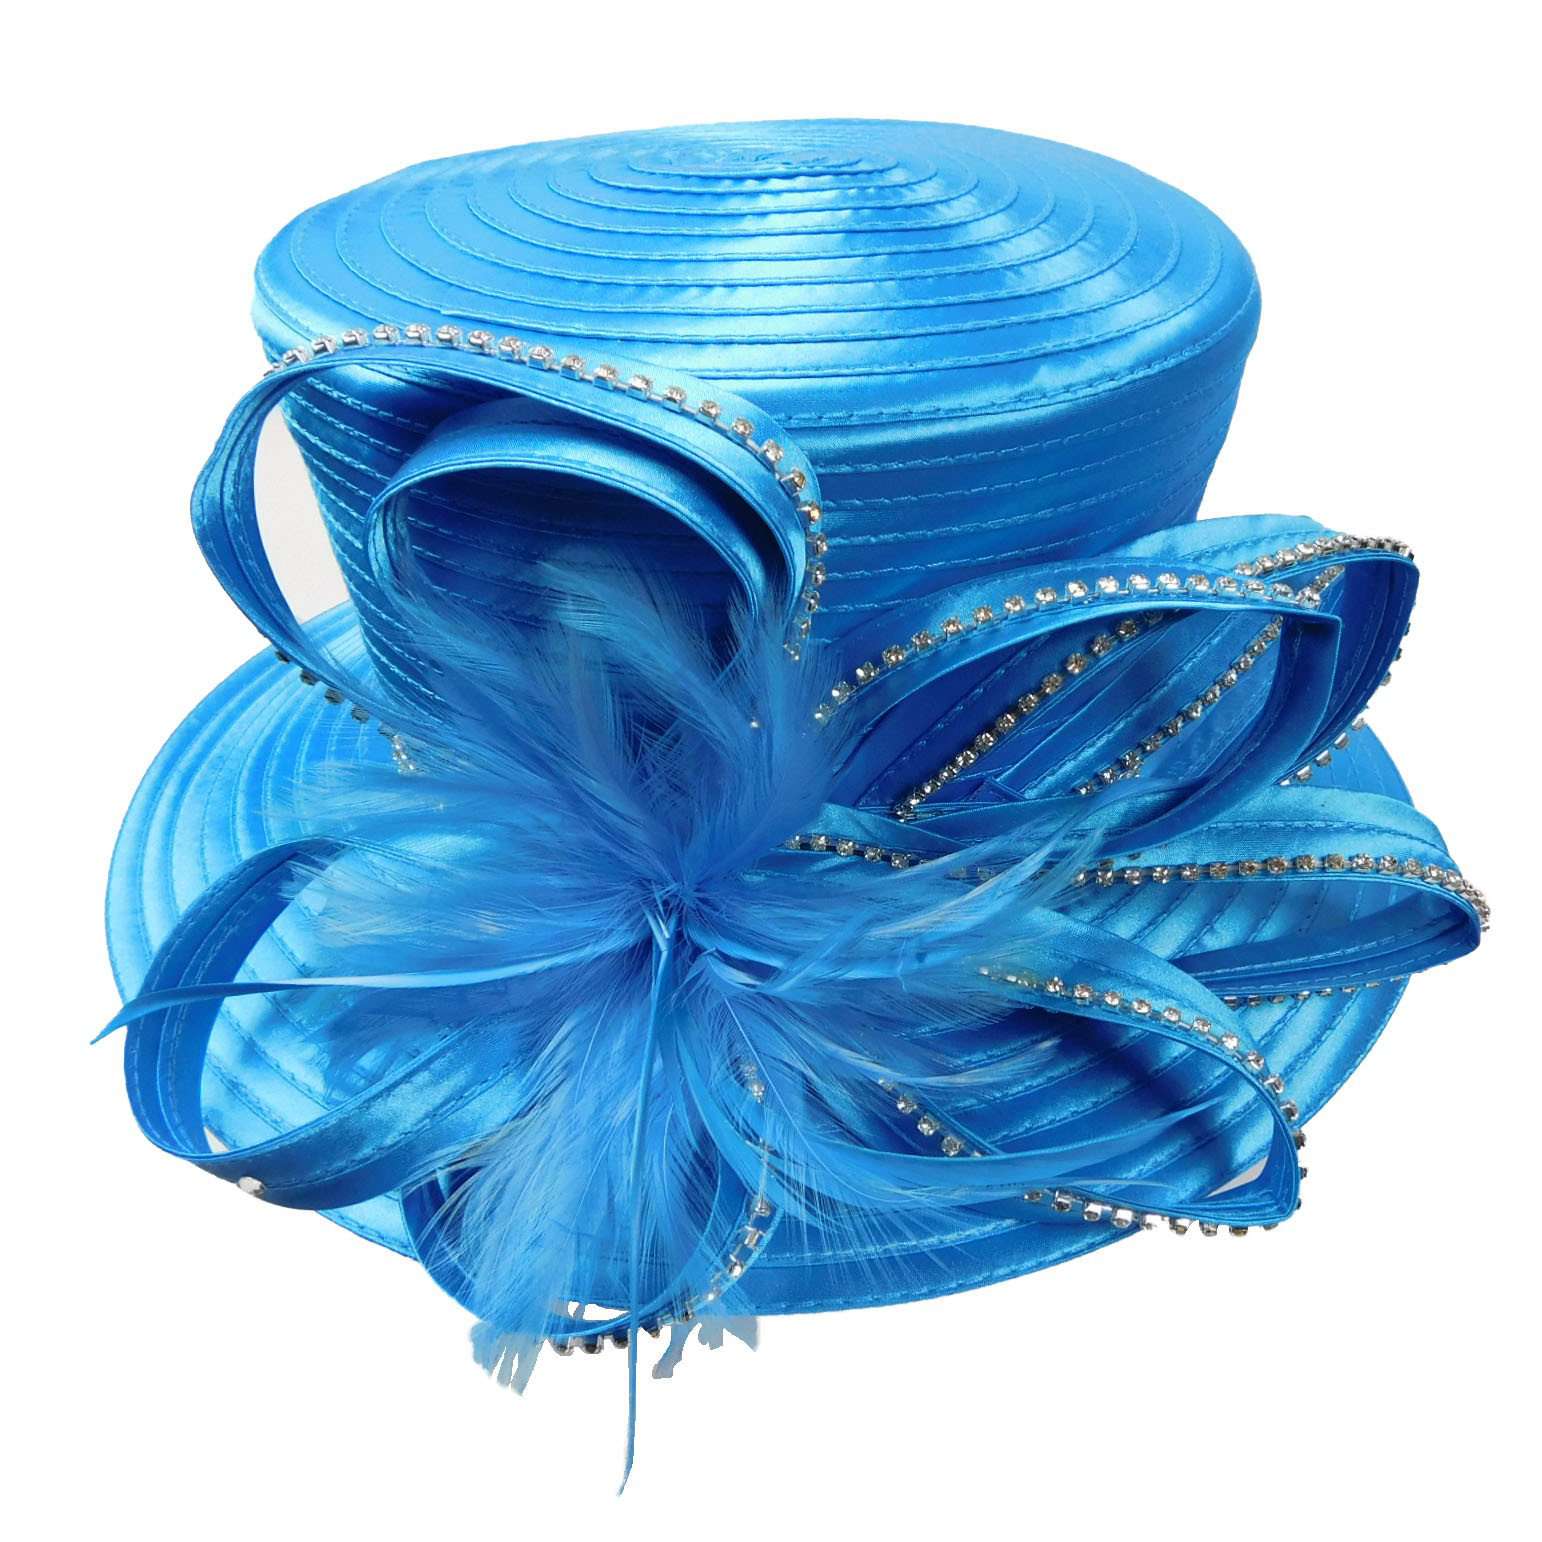 Satin Ribbon Dress Hat with Loopy Ribbon Accent Dress Hat Something Special LA    